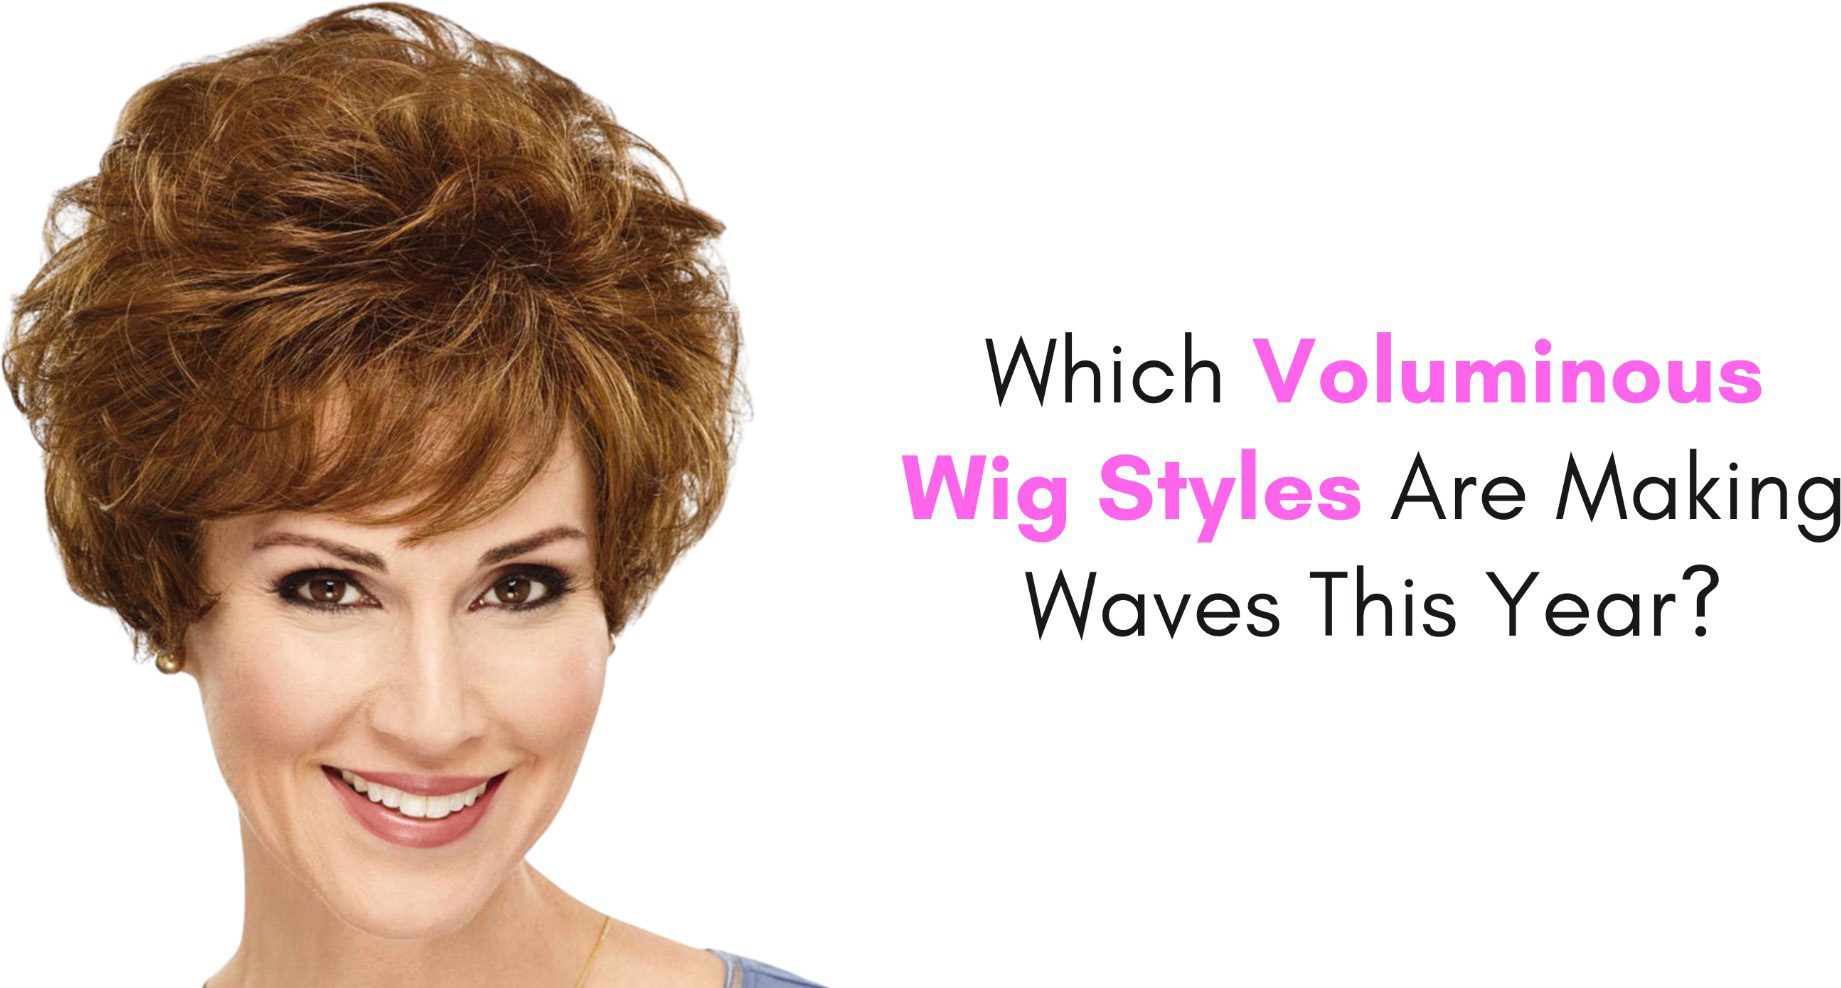 which voluminous wig styles are making waves this year